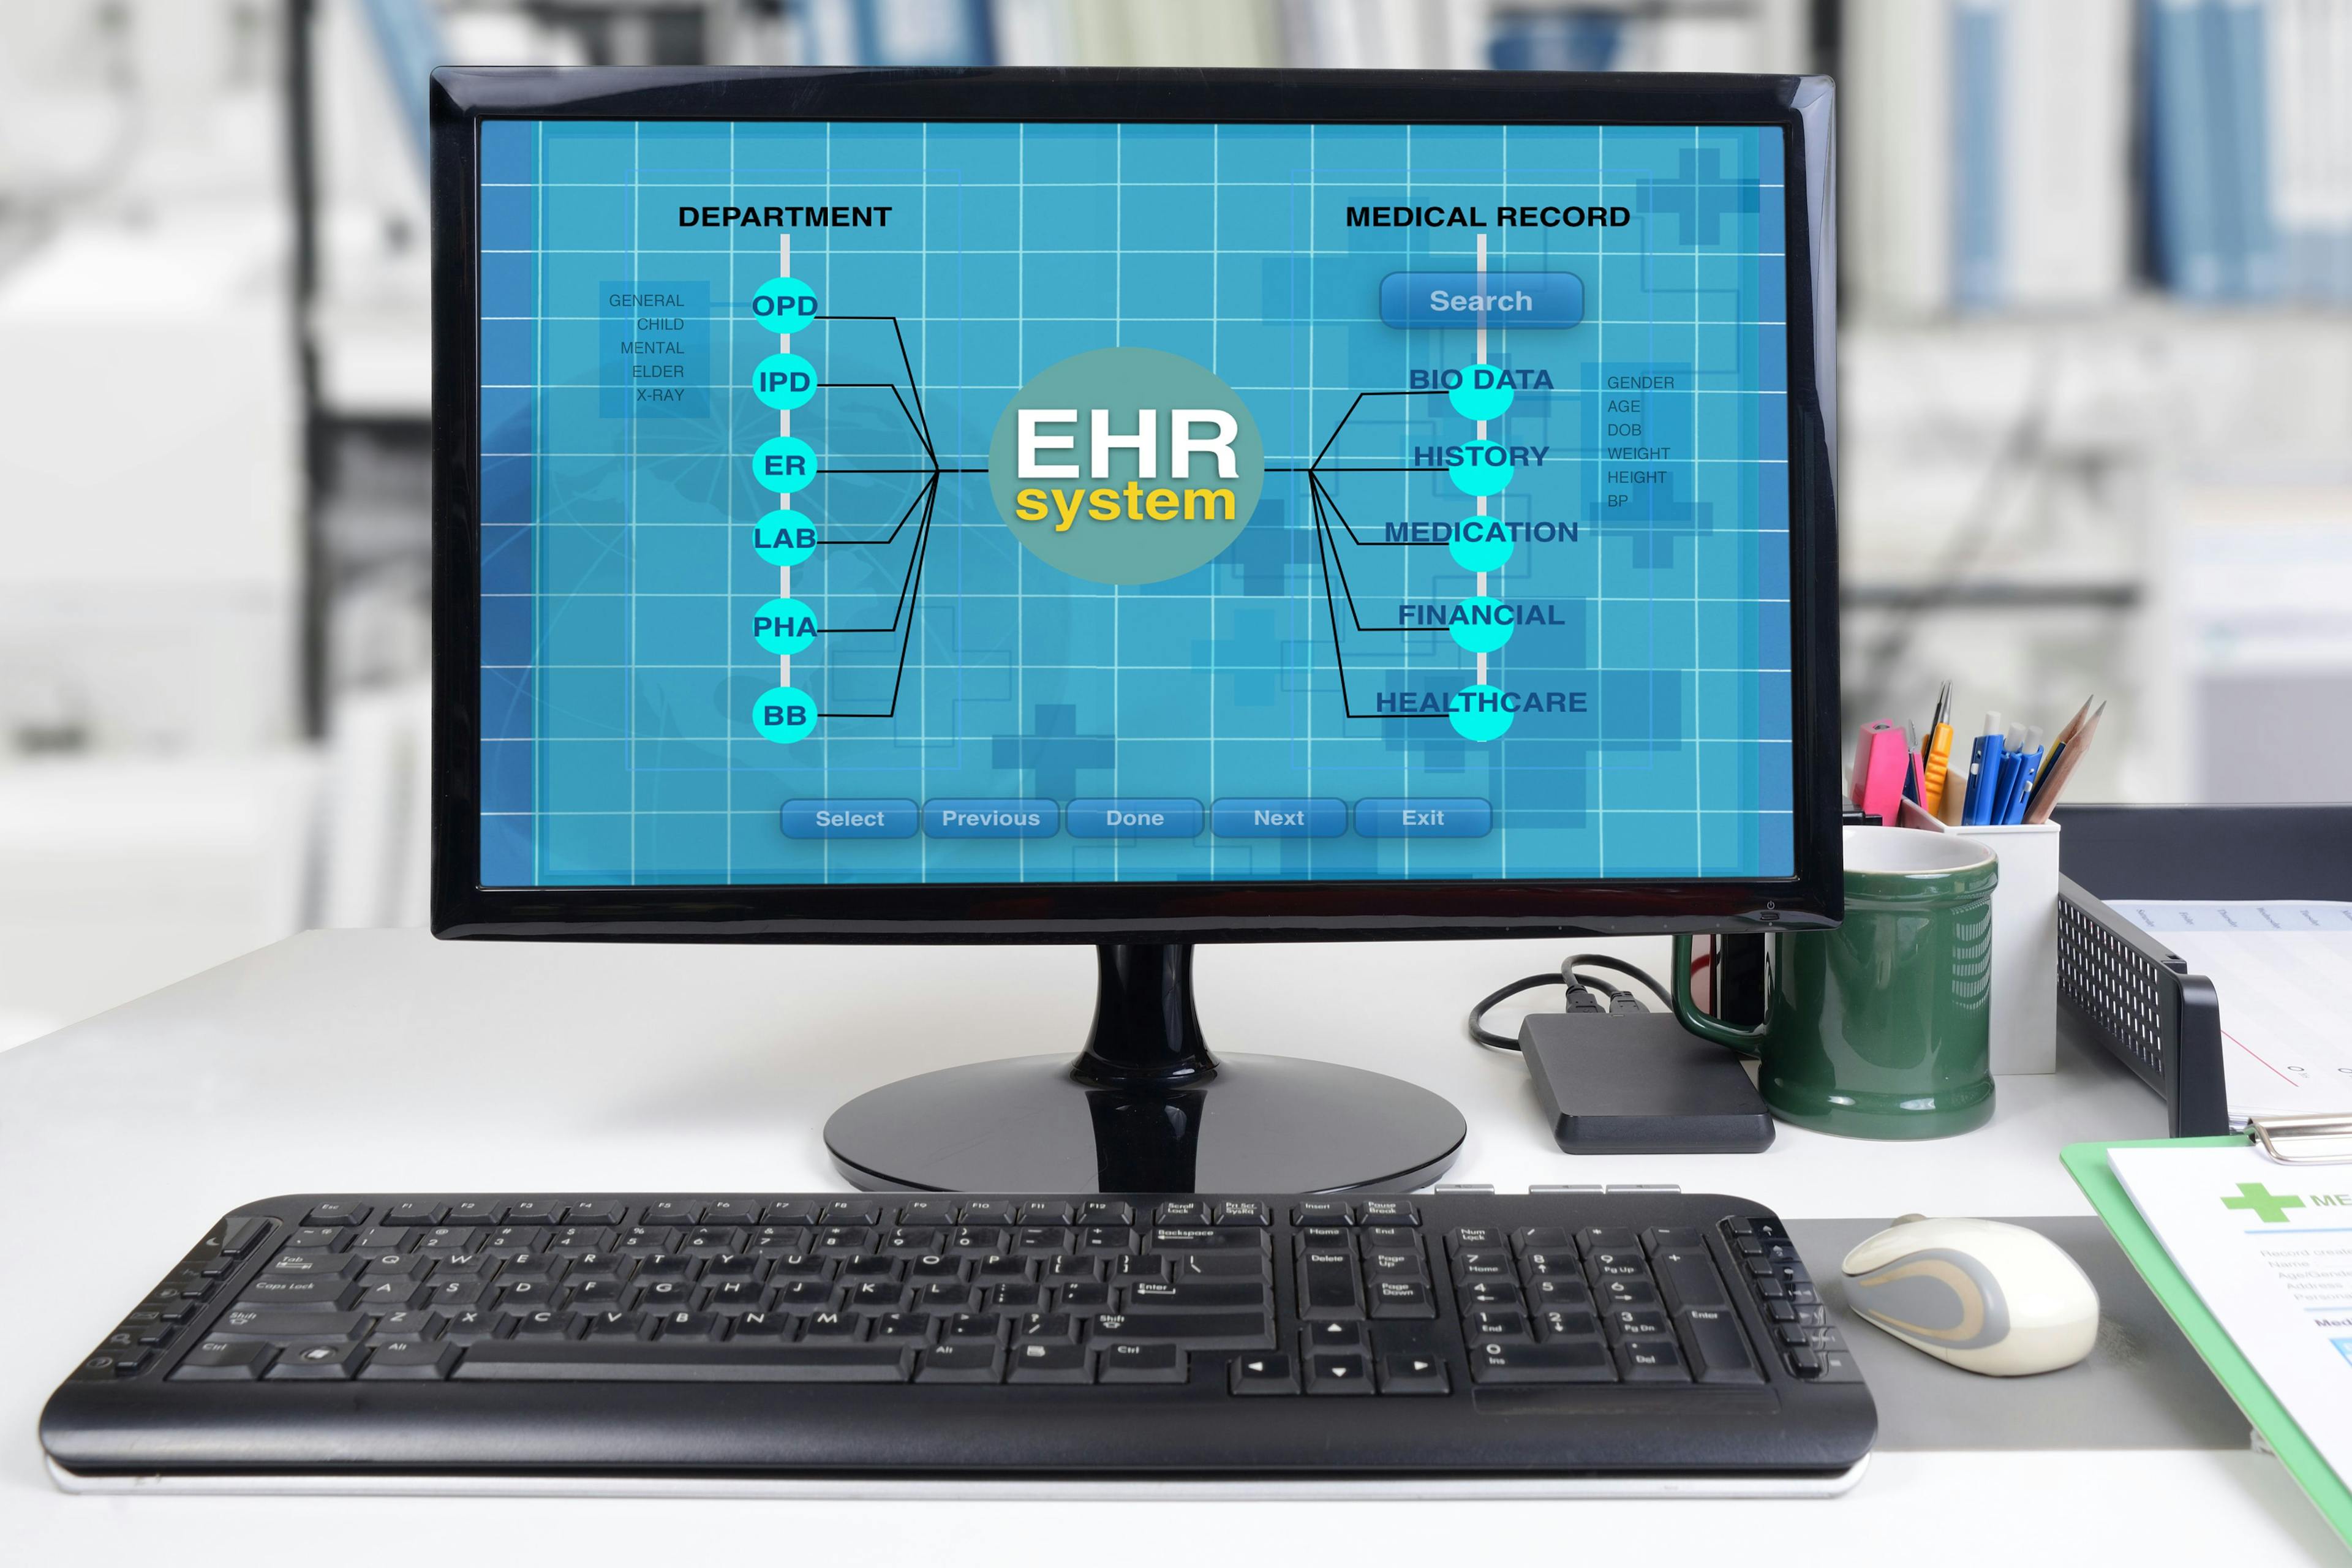 Can Utilizing an Electronic Health Record Improve C difficile Patient Outcomes?